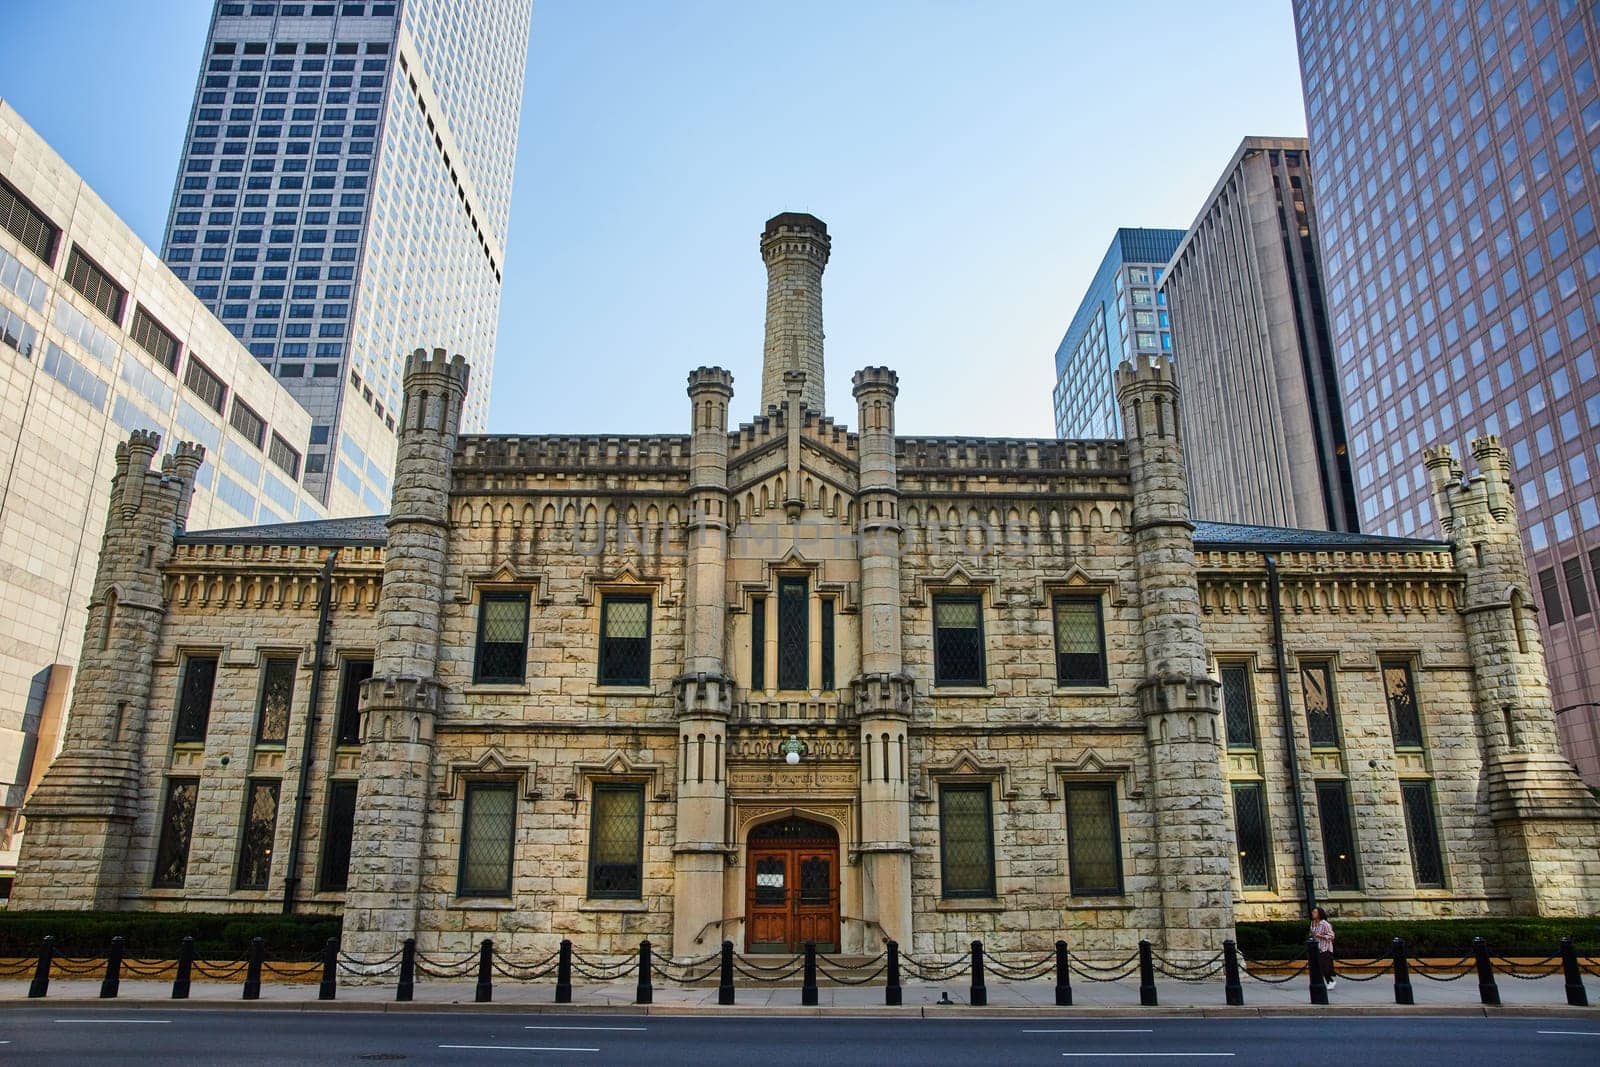 Image of Entrance of old, historic, and original Chicago city water works building with castle architecture